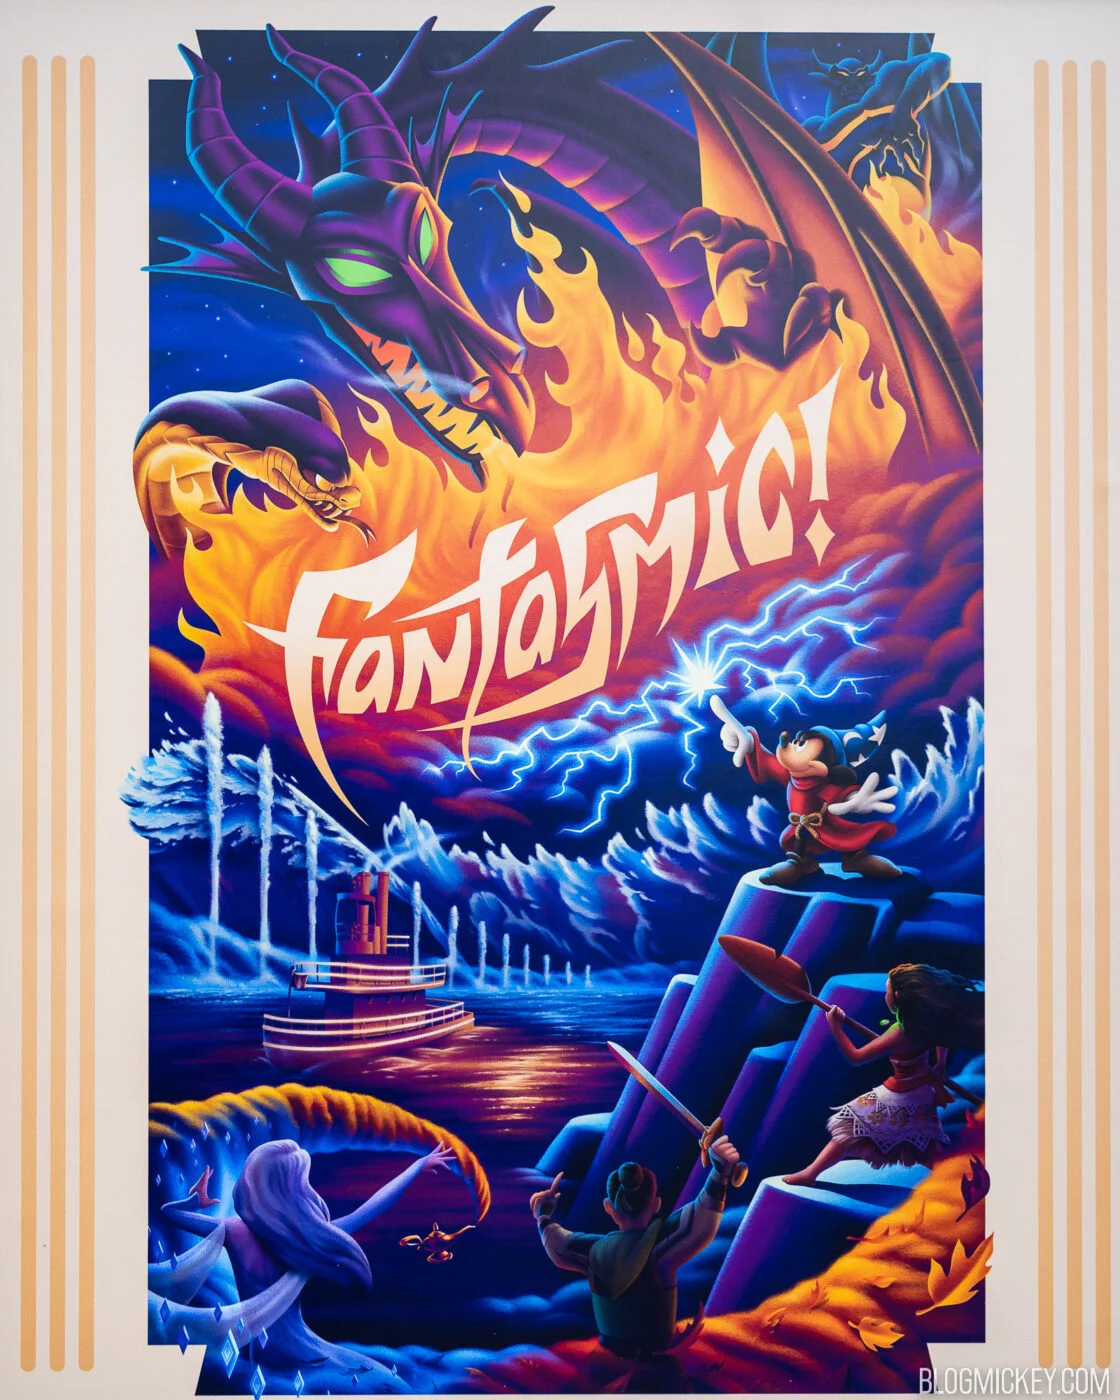 Unveiling the Enchantment: Behind the Animation of The Magic of Fantasmic!